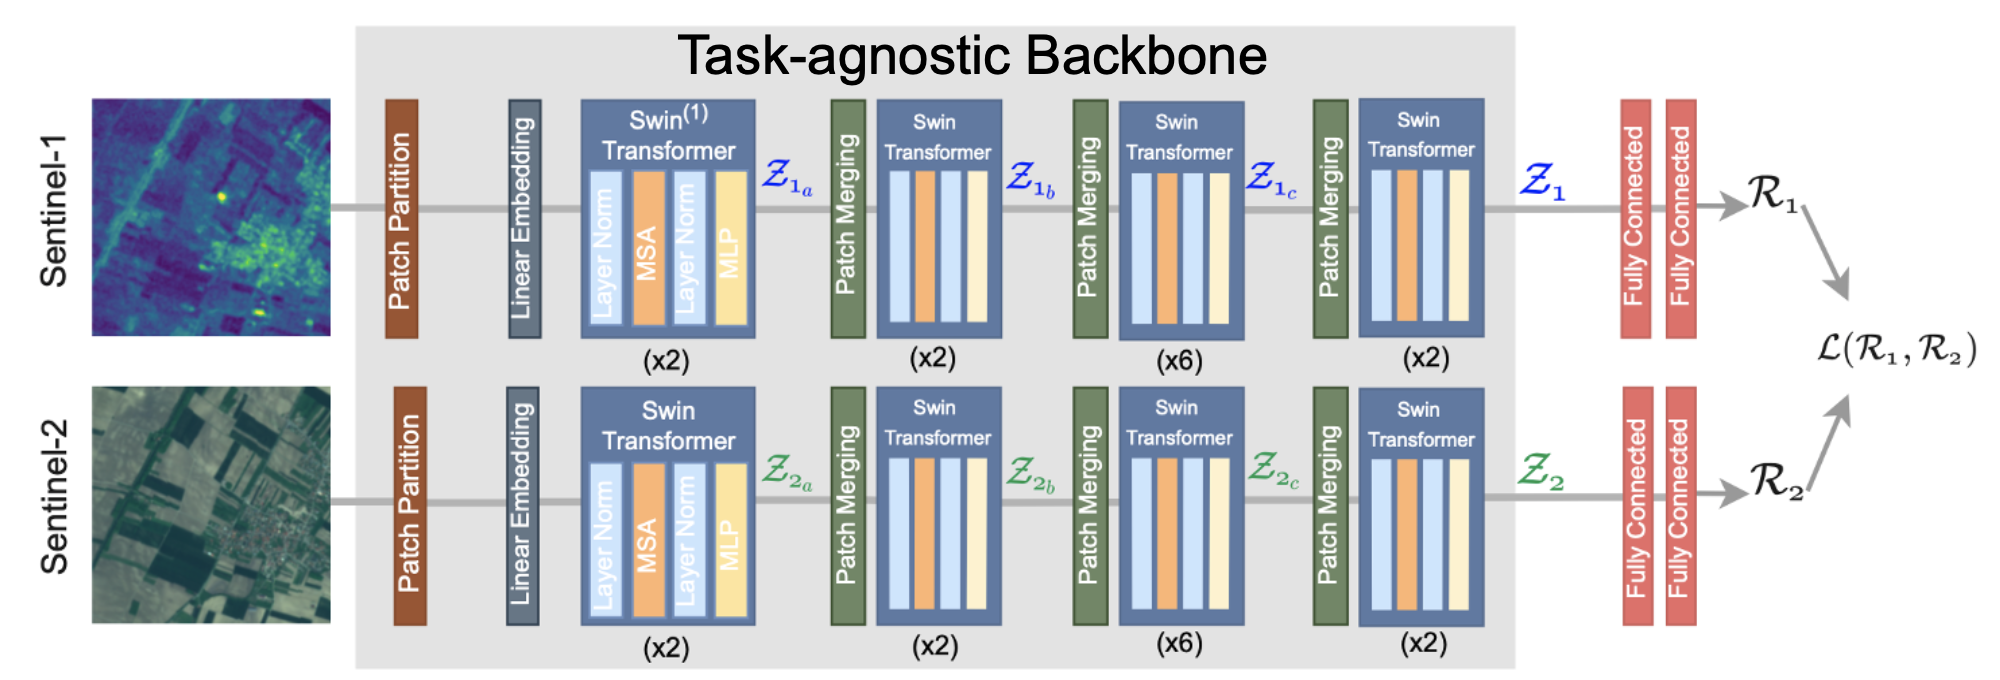 The architecture of our downstream task-agnostic backbone. We pretrain separate backbone branches (Sentinel-1 and Sentinel-2 data) consisting of Swin-Transformers using contrastive self-supervised learning.